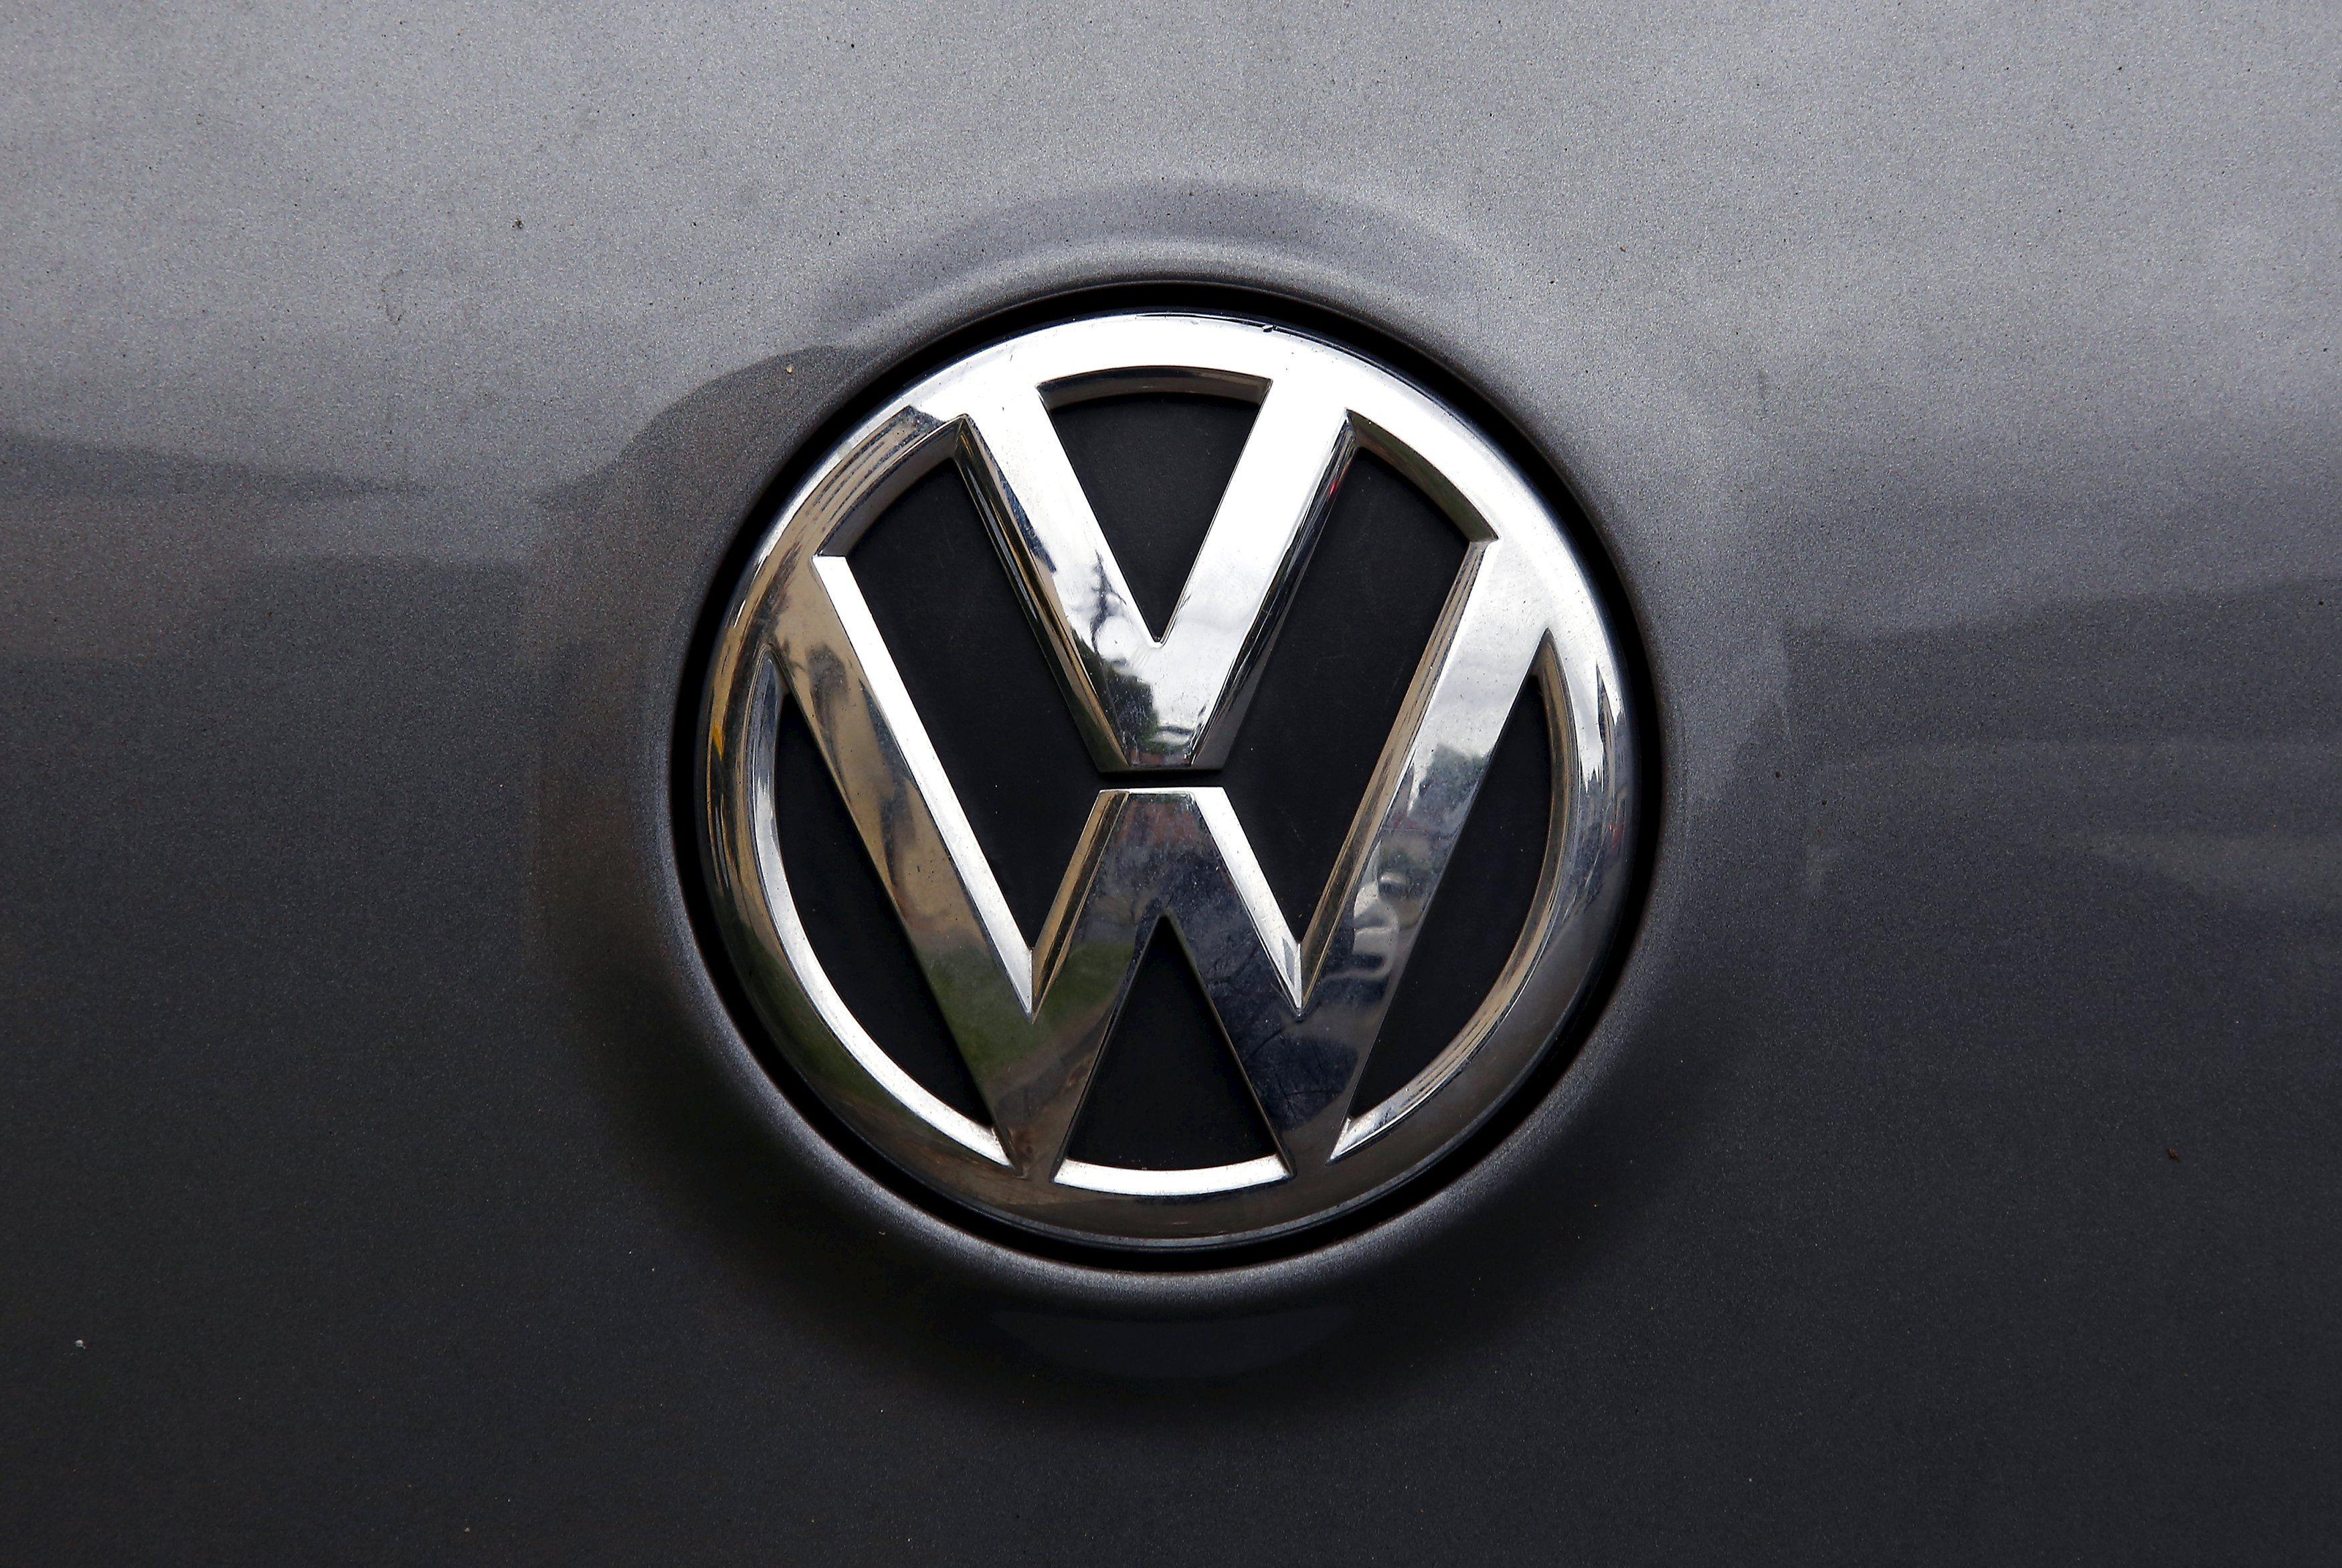 Cool VW Logo - VW to freeze promotions due to emissions scandal: report